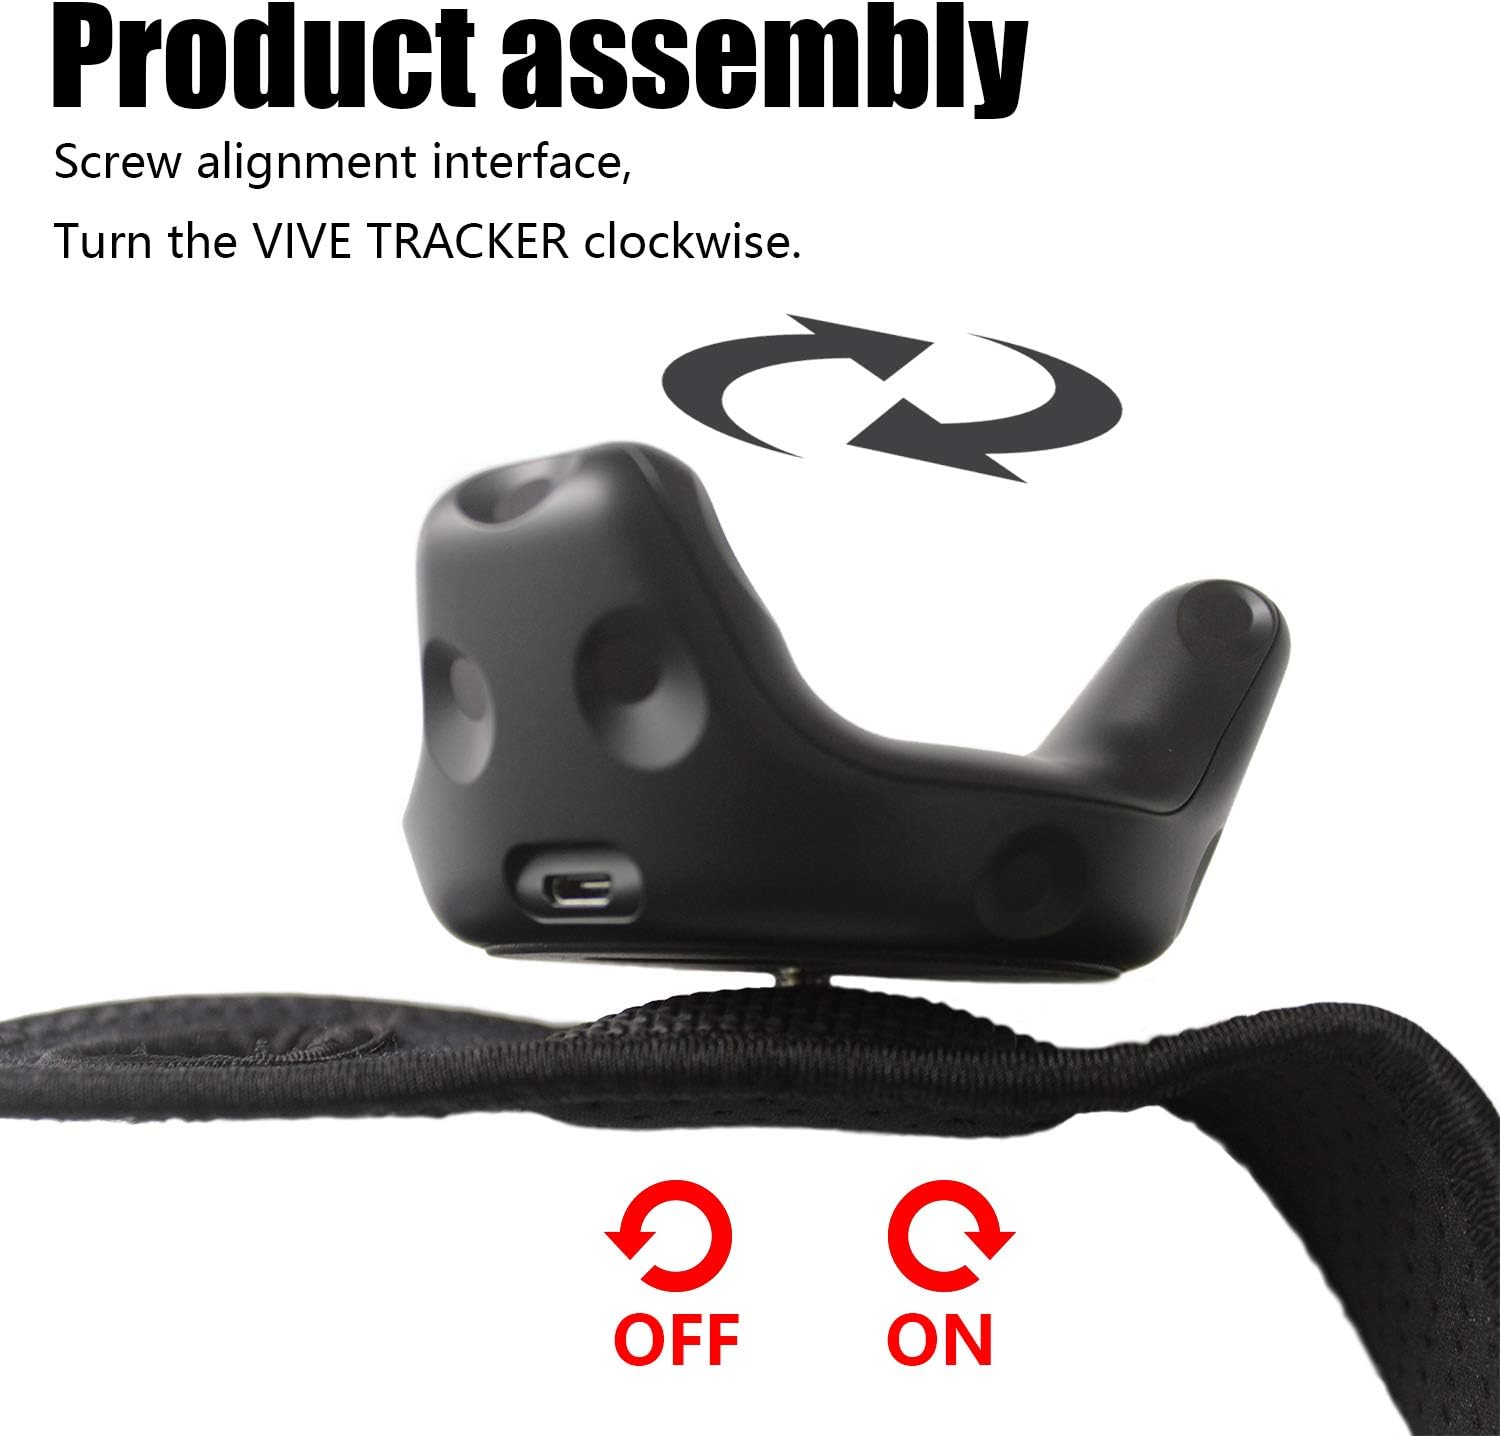 AMVR Palm Tracker Straps for Vive Tracker Accurate Whole Body Tracking and Motion Capture (2 units) AMVRSHOP